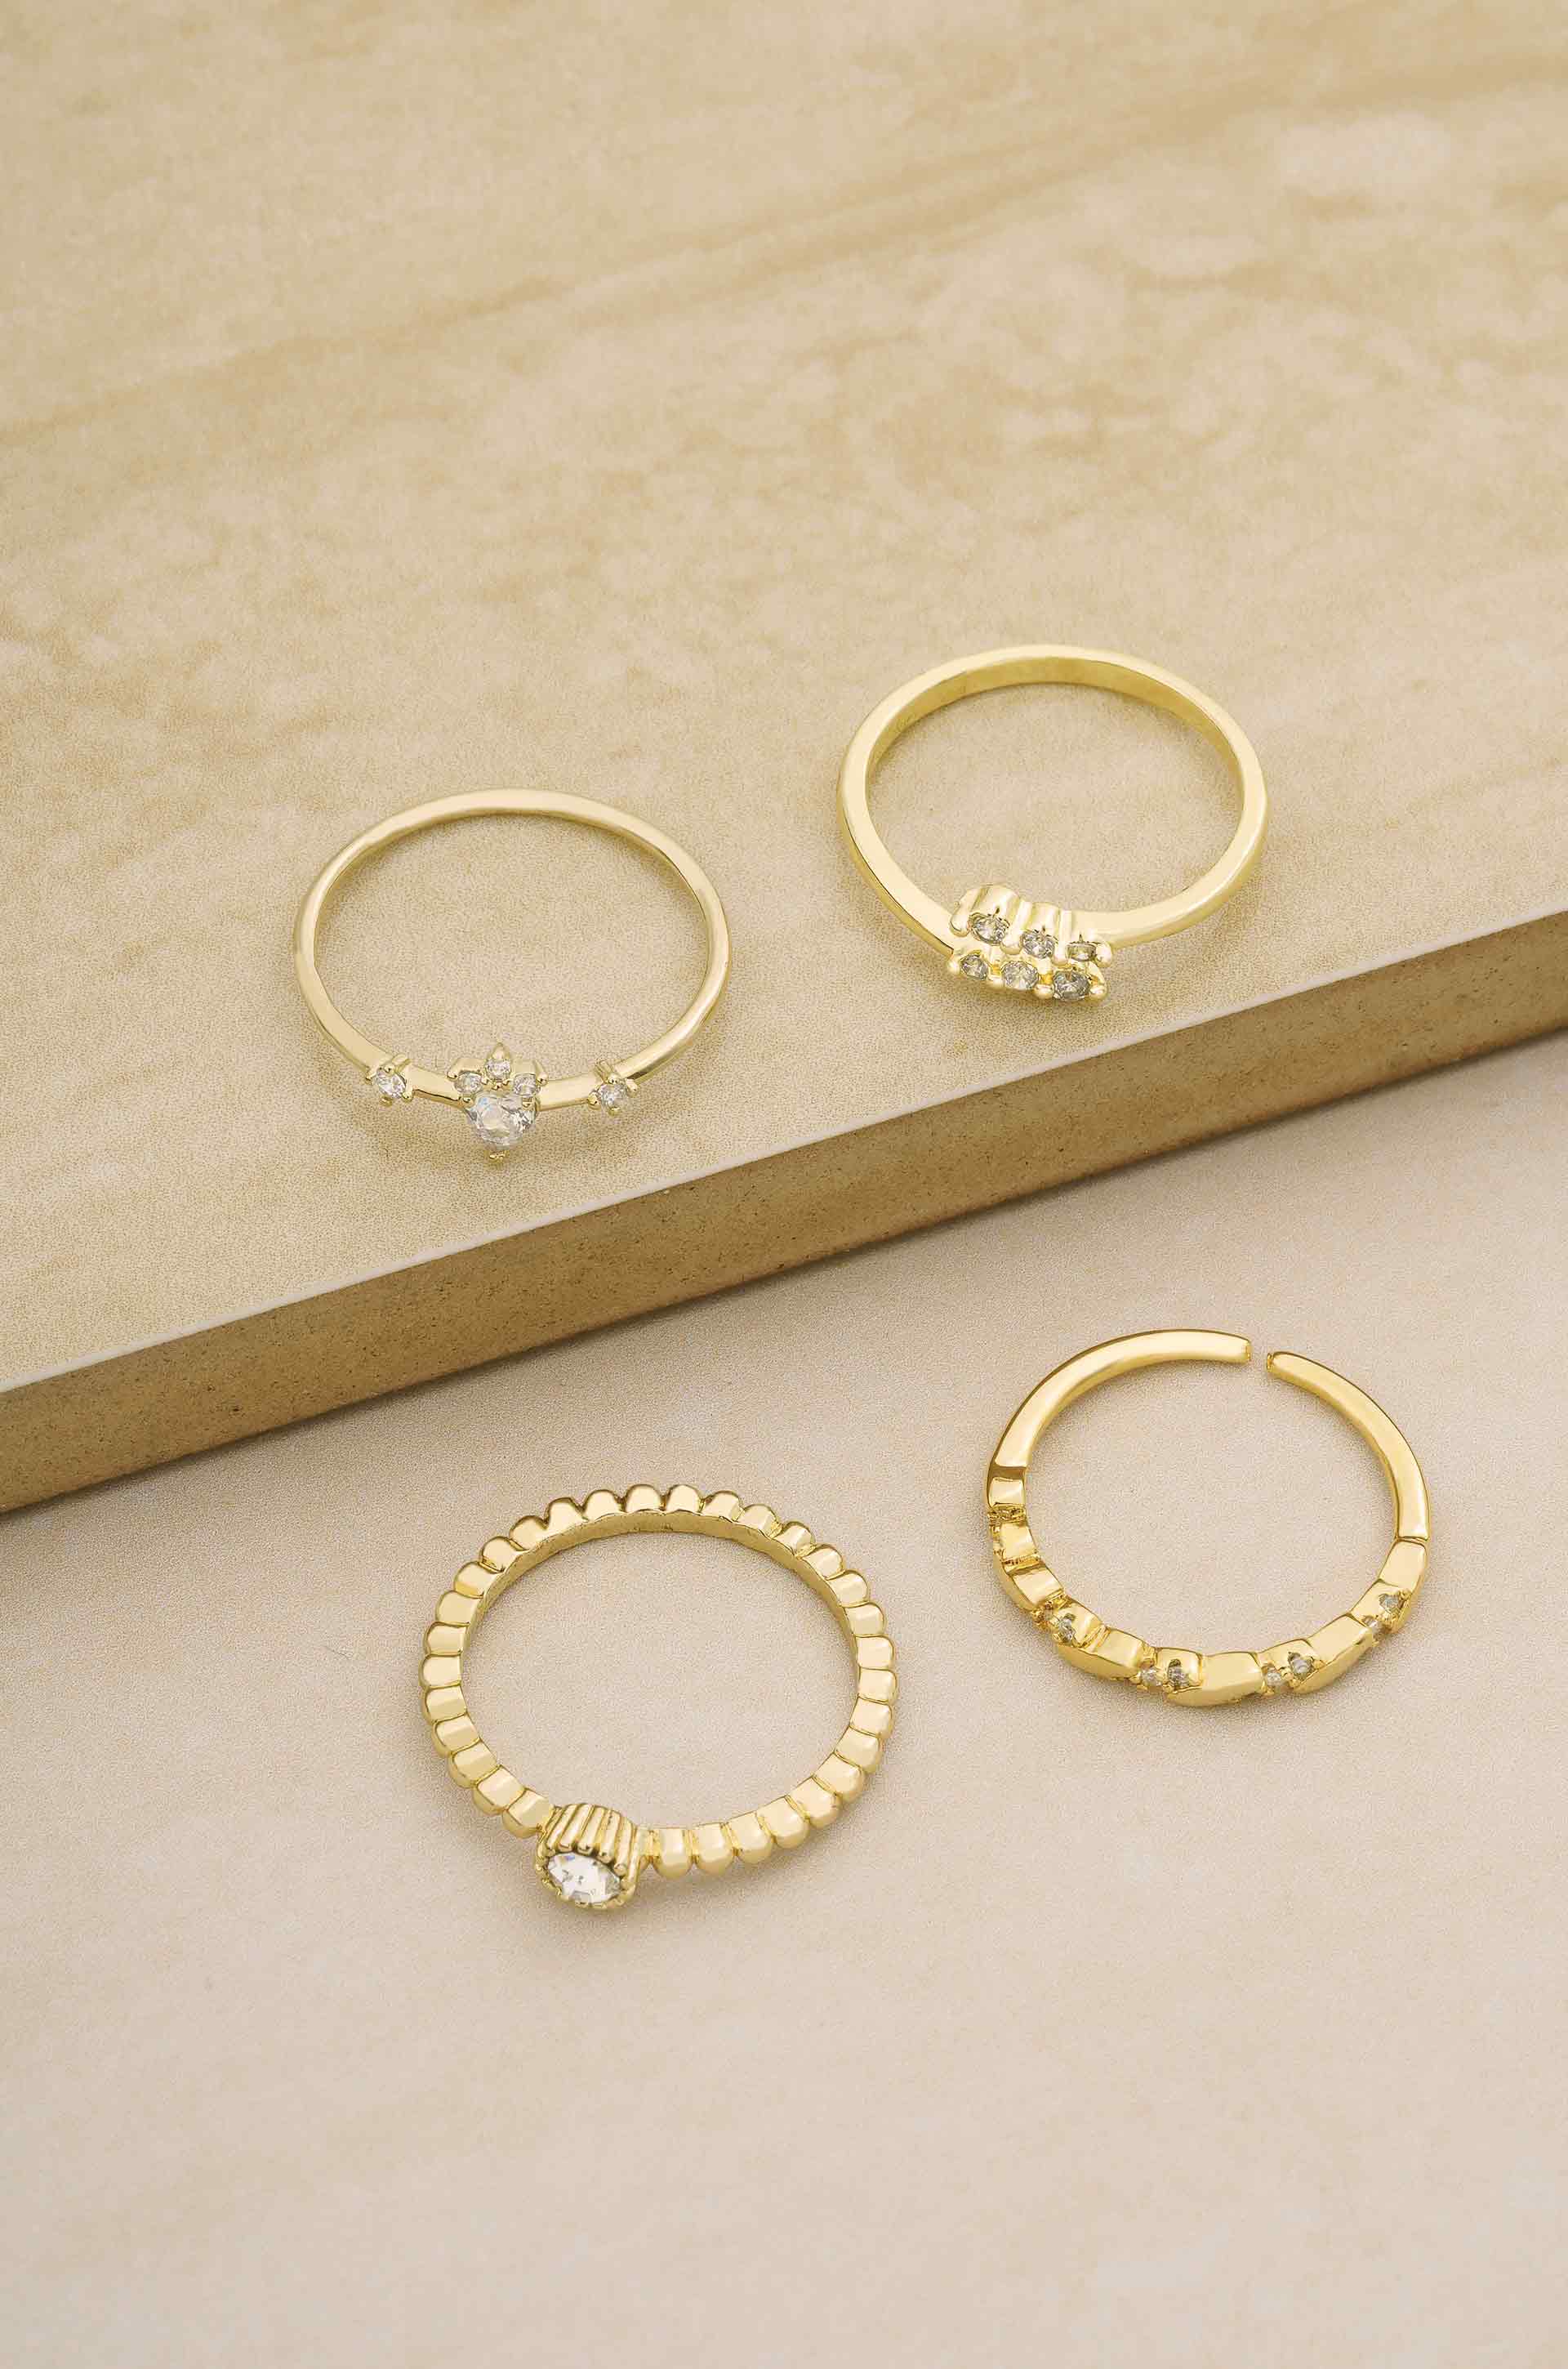 Keep It Simple 18k Gold Plated Ring Set on s;ate